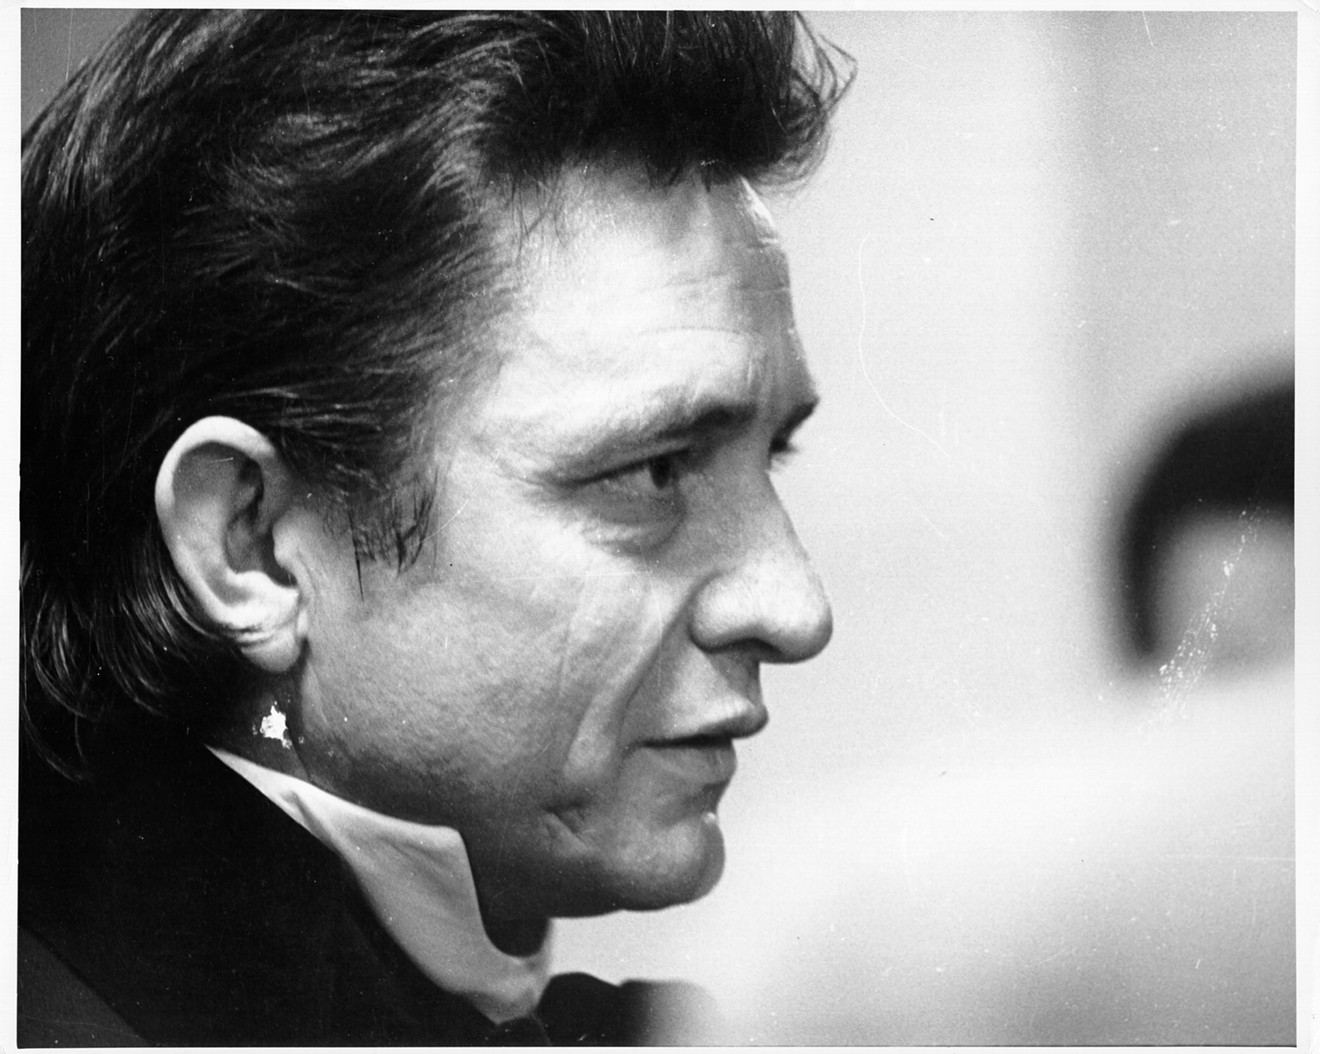 Johnny Cash released some of his best work in the latter part of his career.